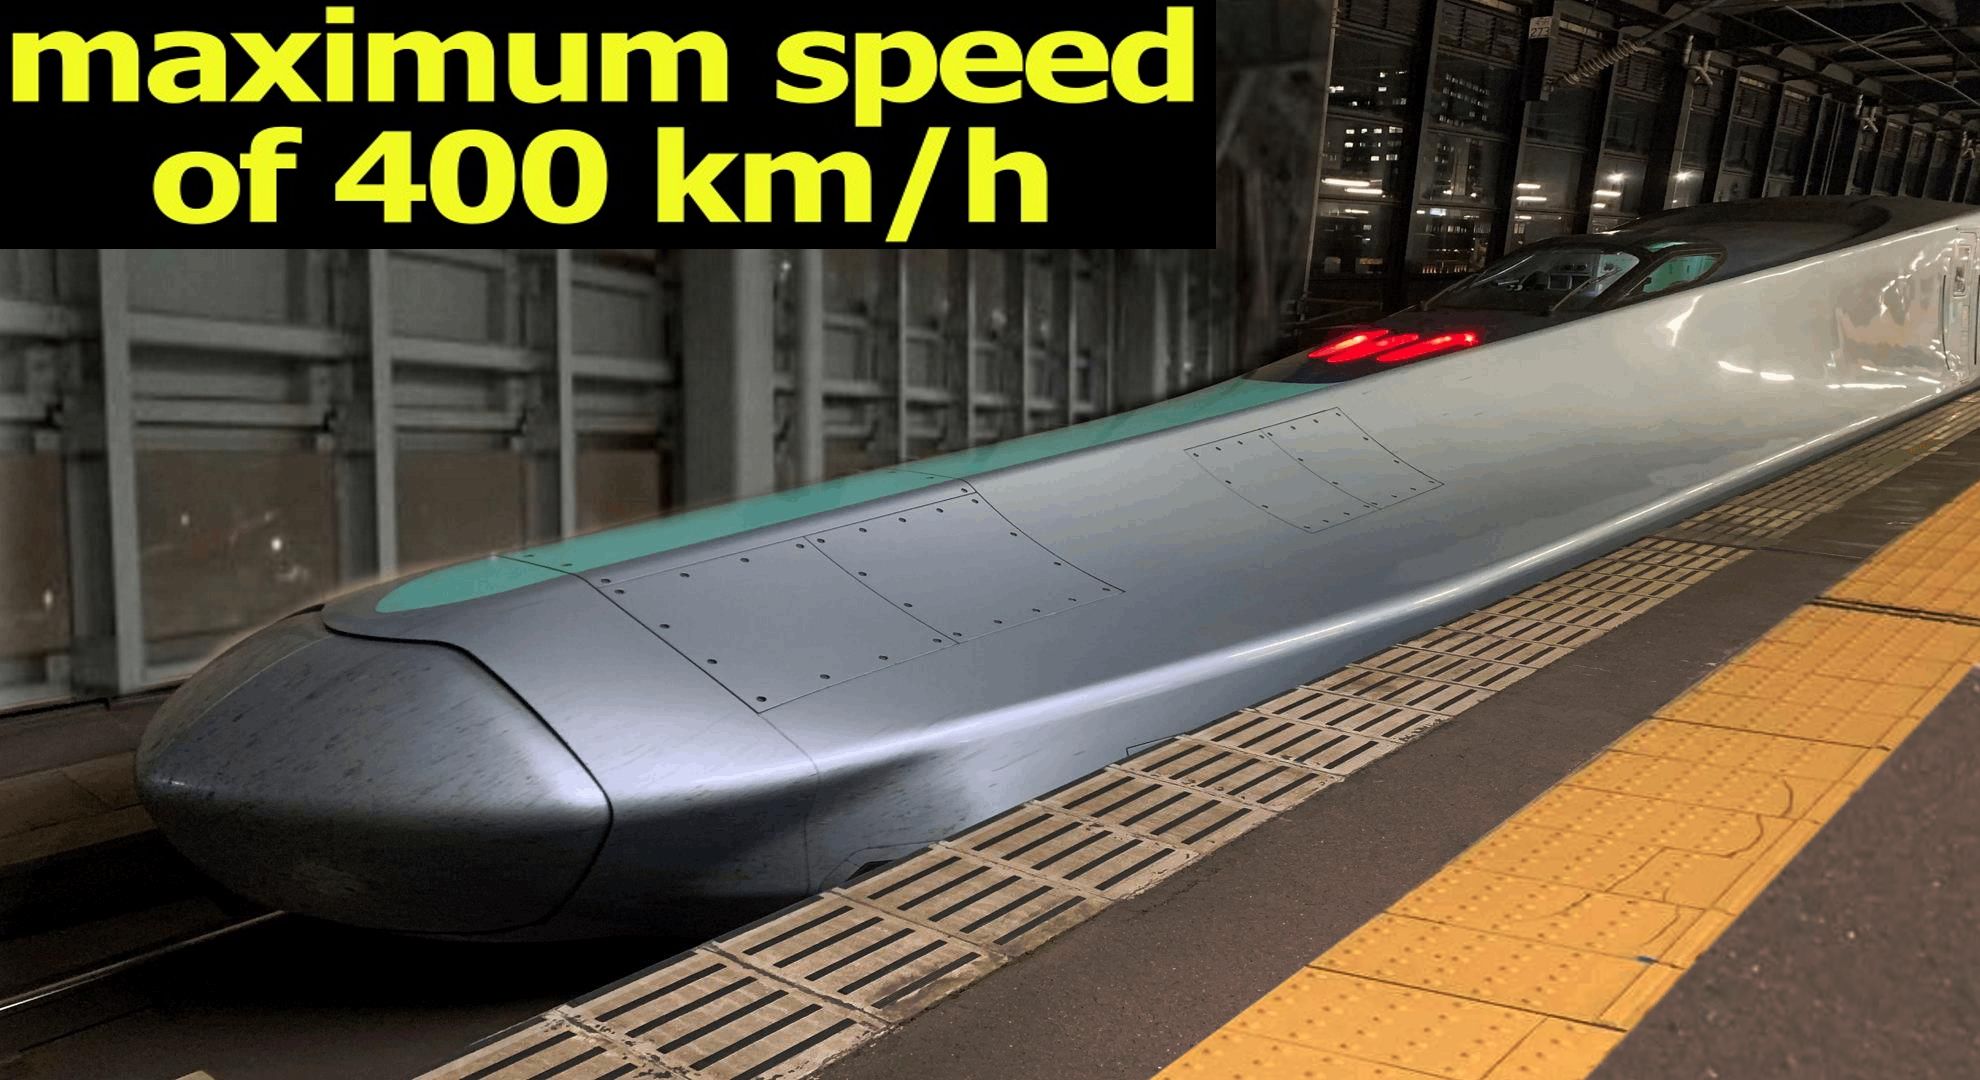 fastest ever bullet train tested by Japan